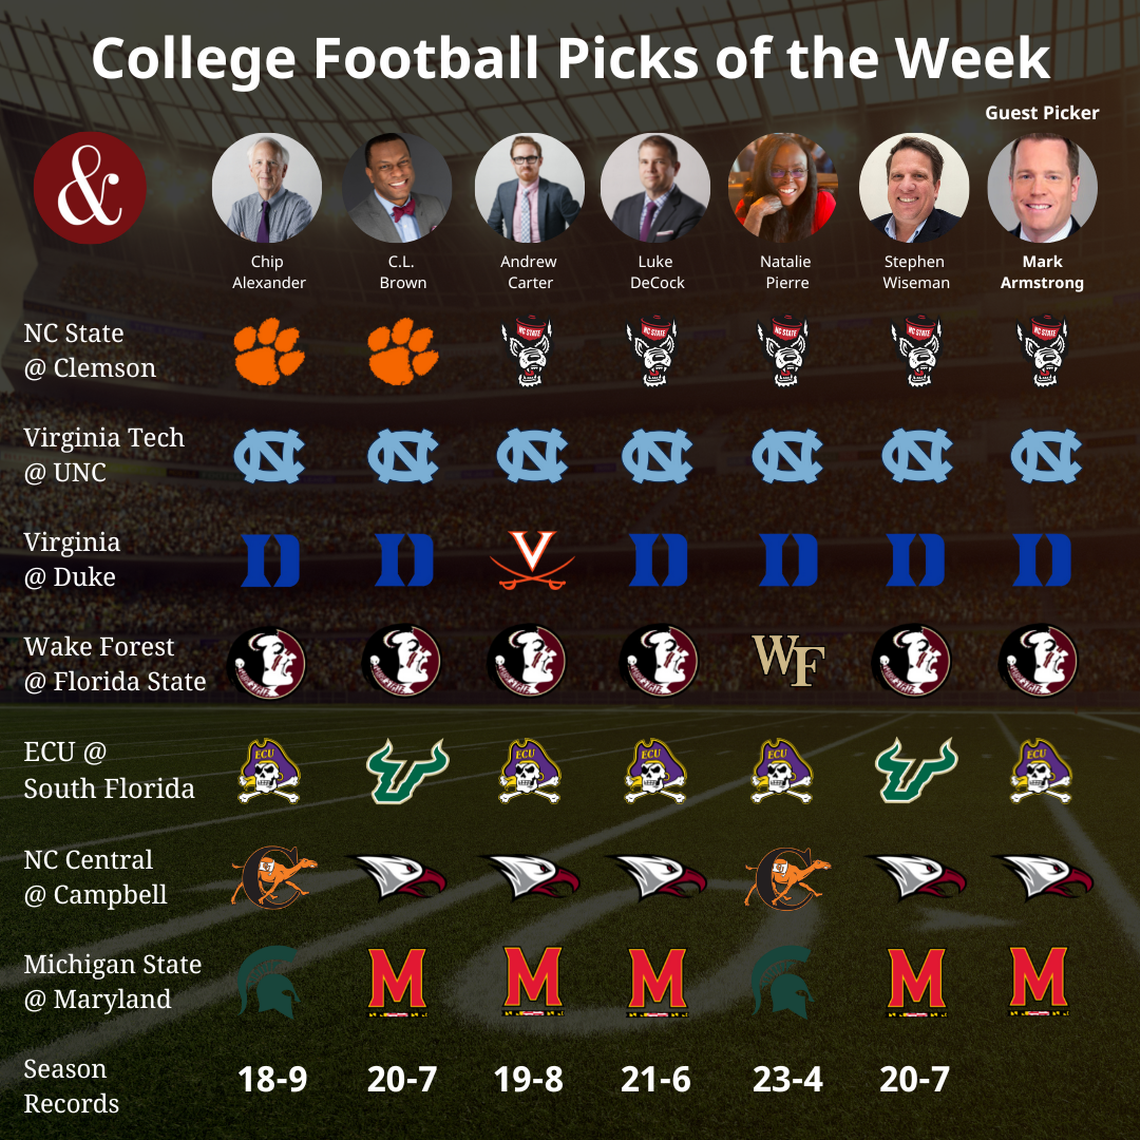 News & Observer sports staff picks games for Week 5 of the college football season. Former ABC 11 sports anchor Mark Armstrong is this week’s guest picker.